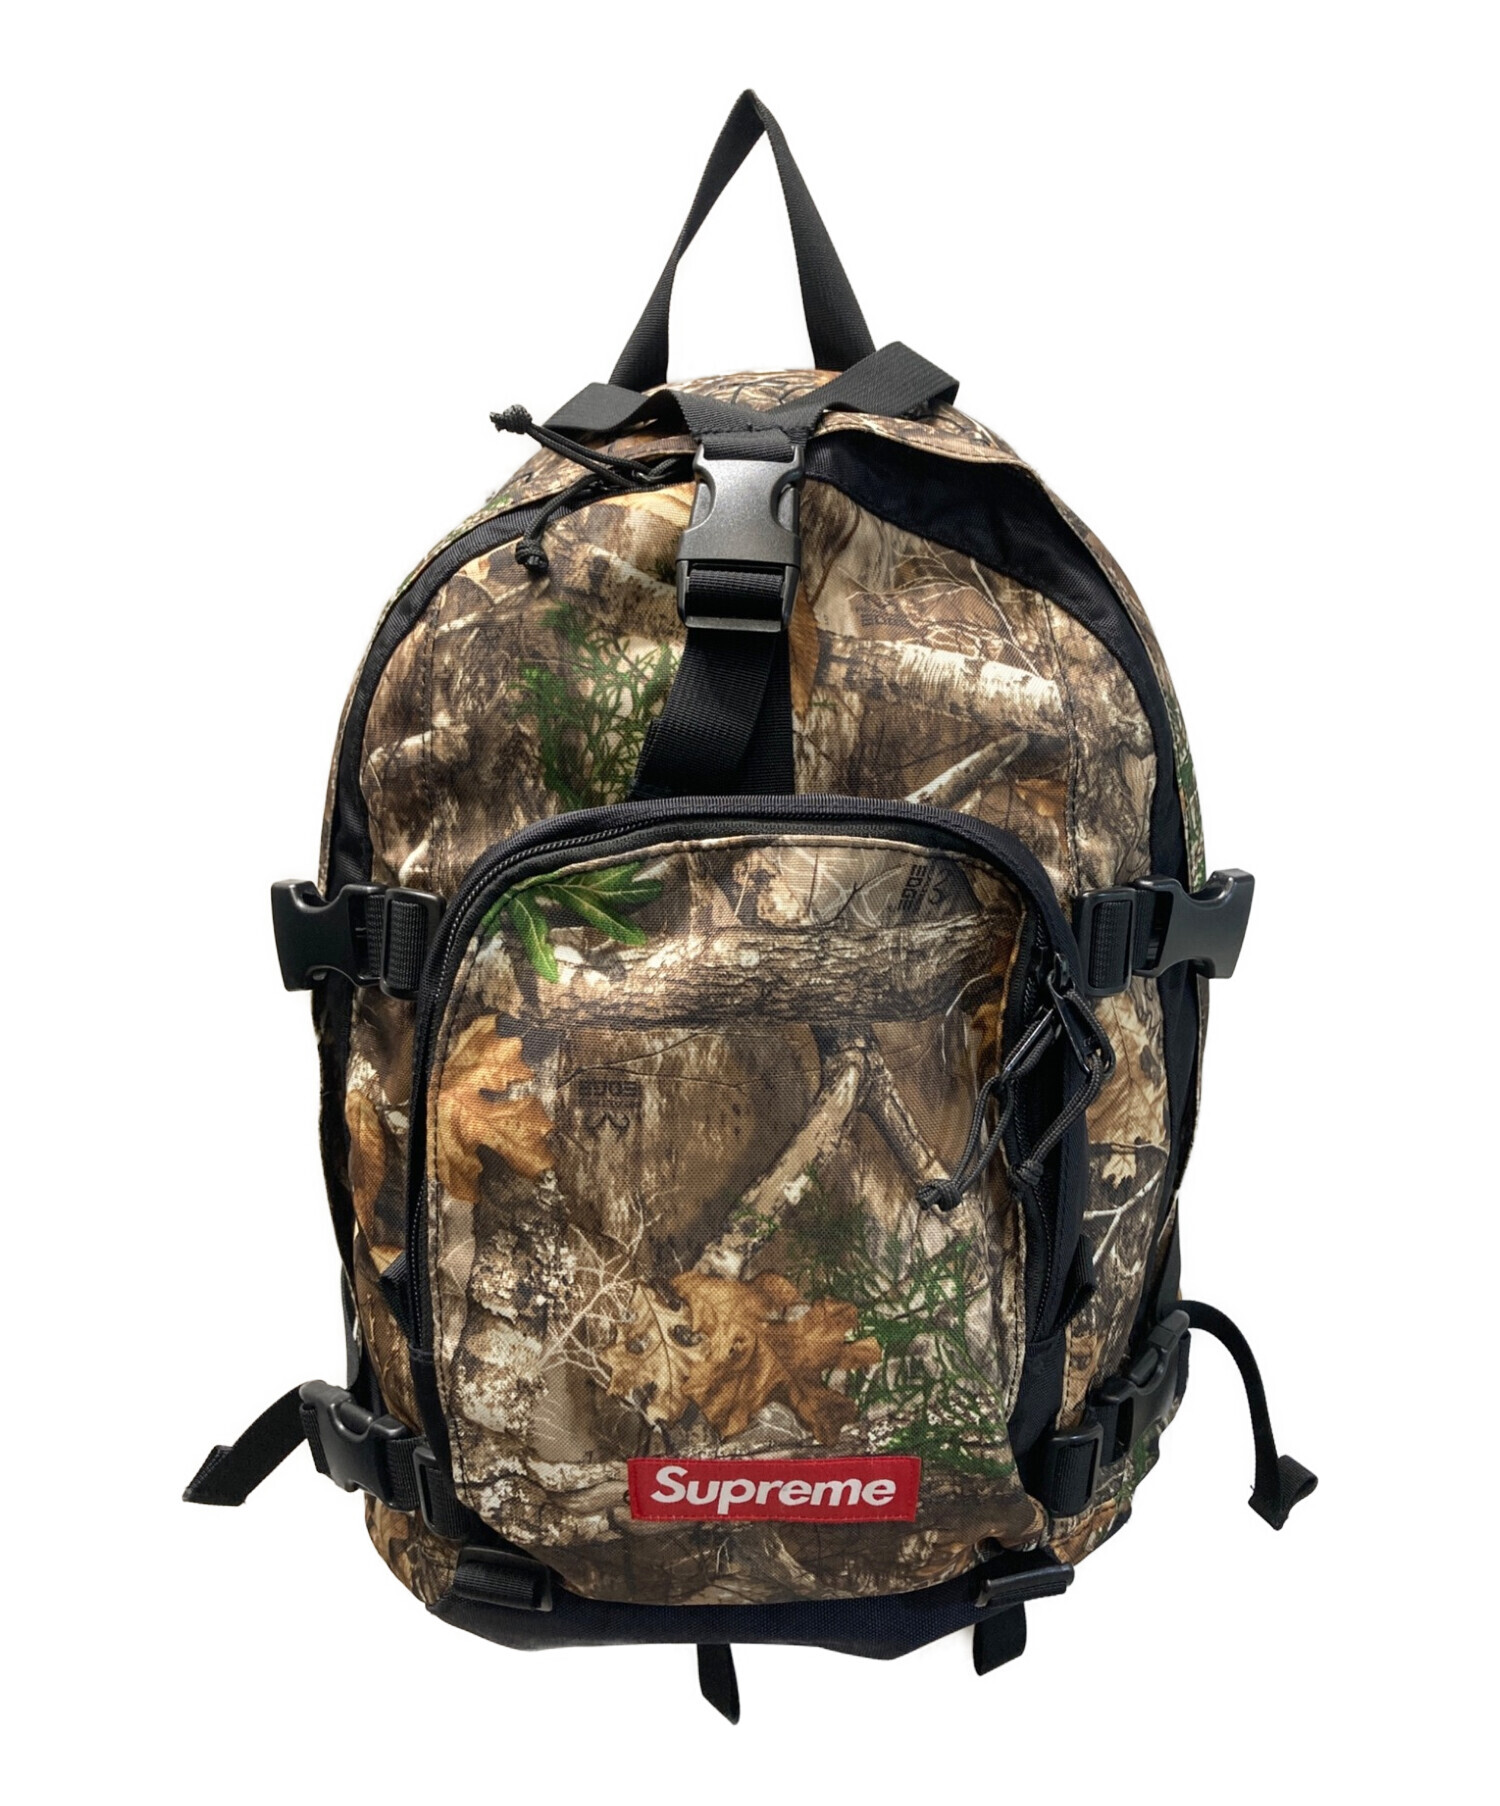 SUPREME (シュプリーム) Real Tree Camo Backpack/リアルツリーカモ バックパック